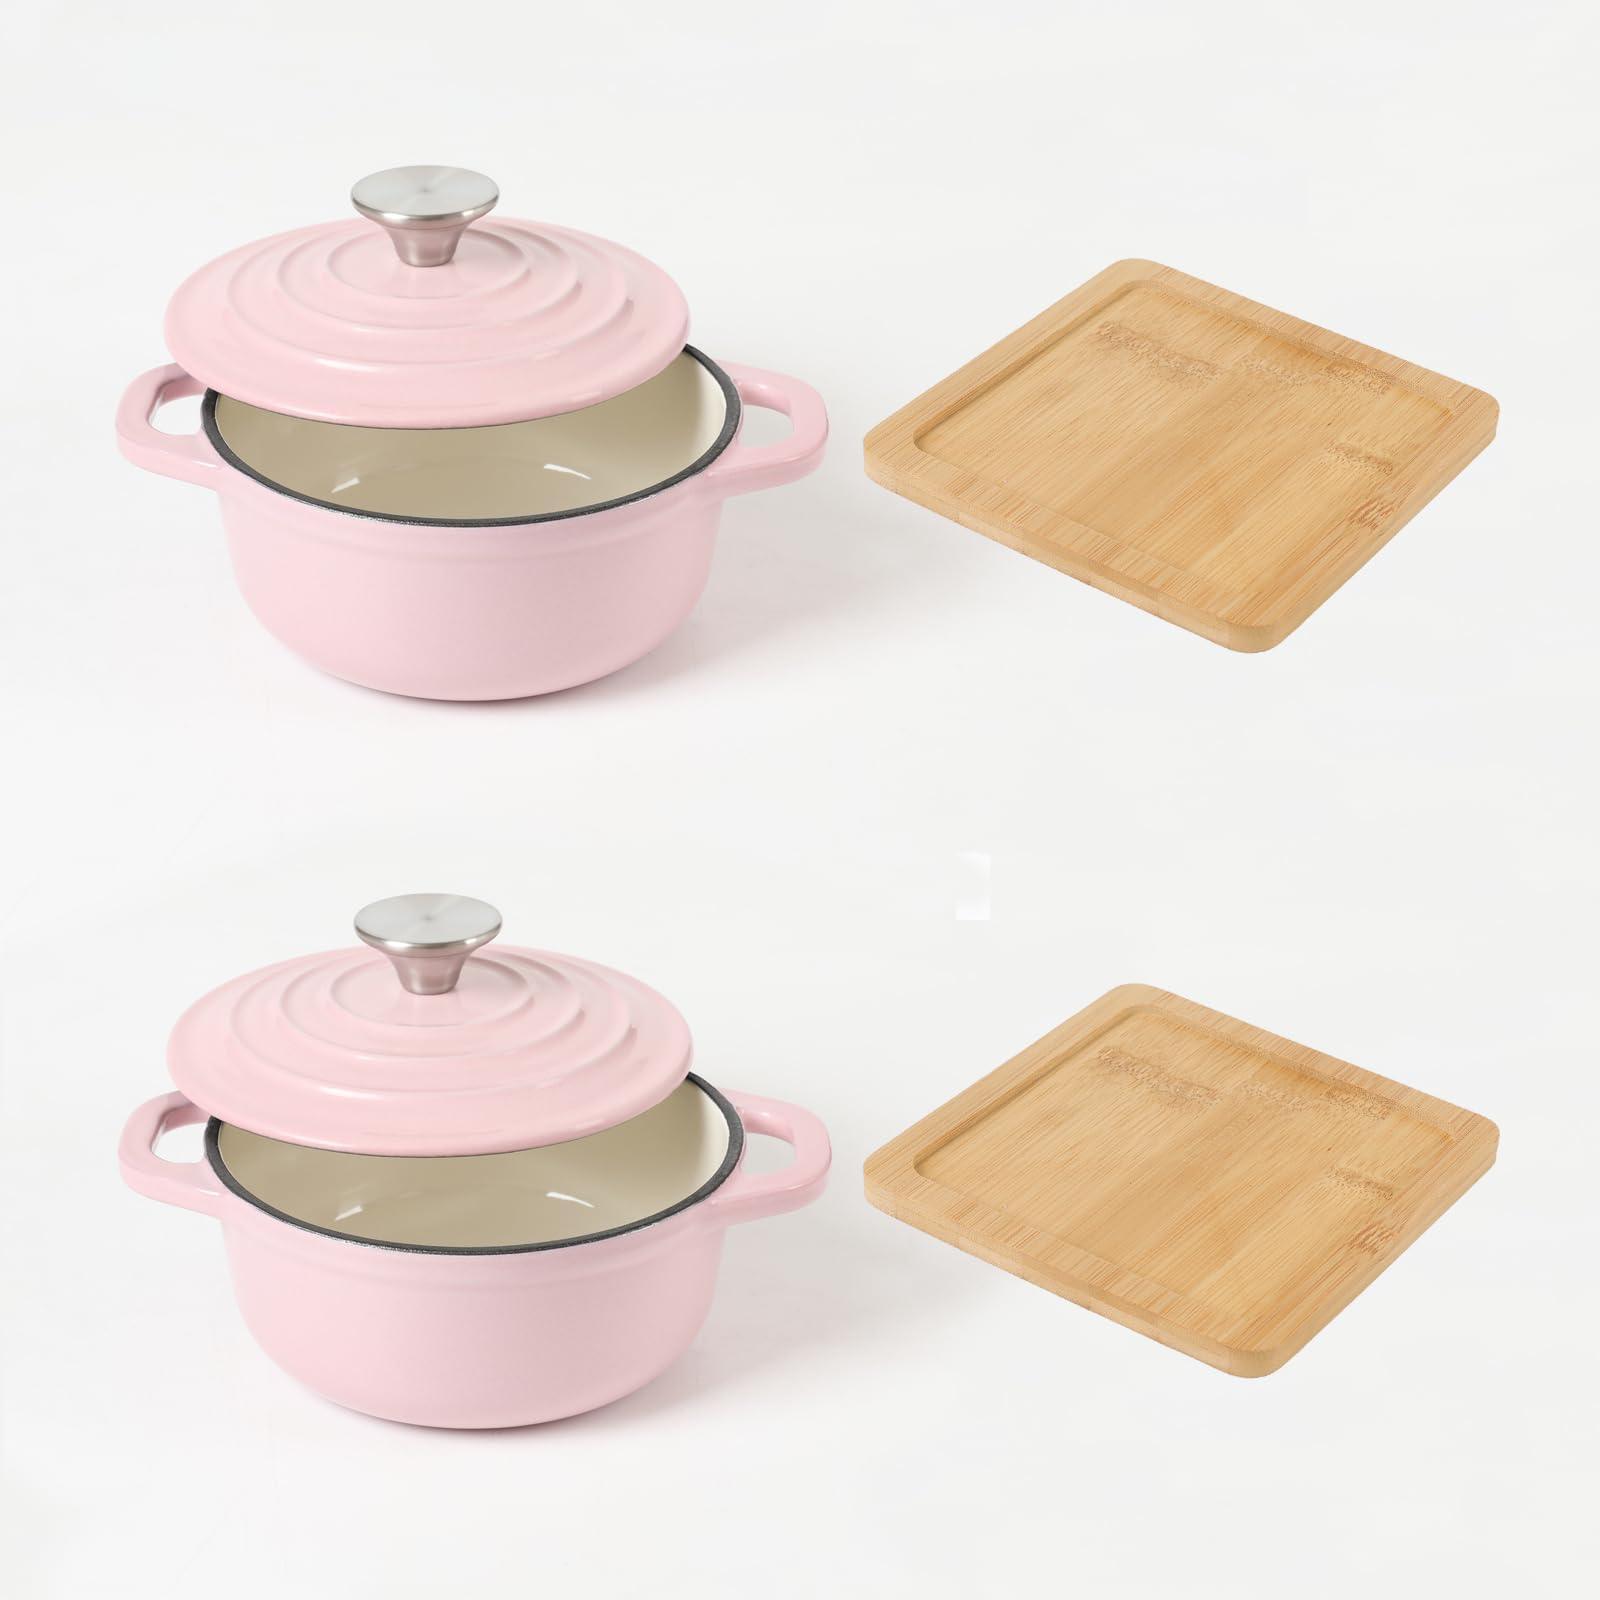 HAWOK Enameled Cast Iron Mini Round Cocotte Set, 0.7QT Mini Dutch Ovens with Lids and Bamboo Trays, 667ml/22.57oz/2.82cups, Set of 2, Pink - CookCave